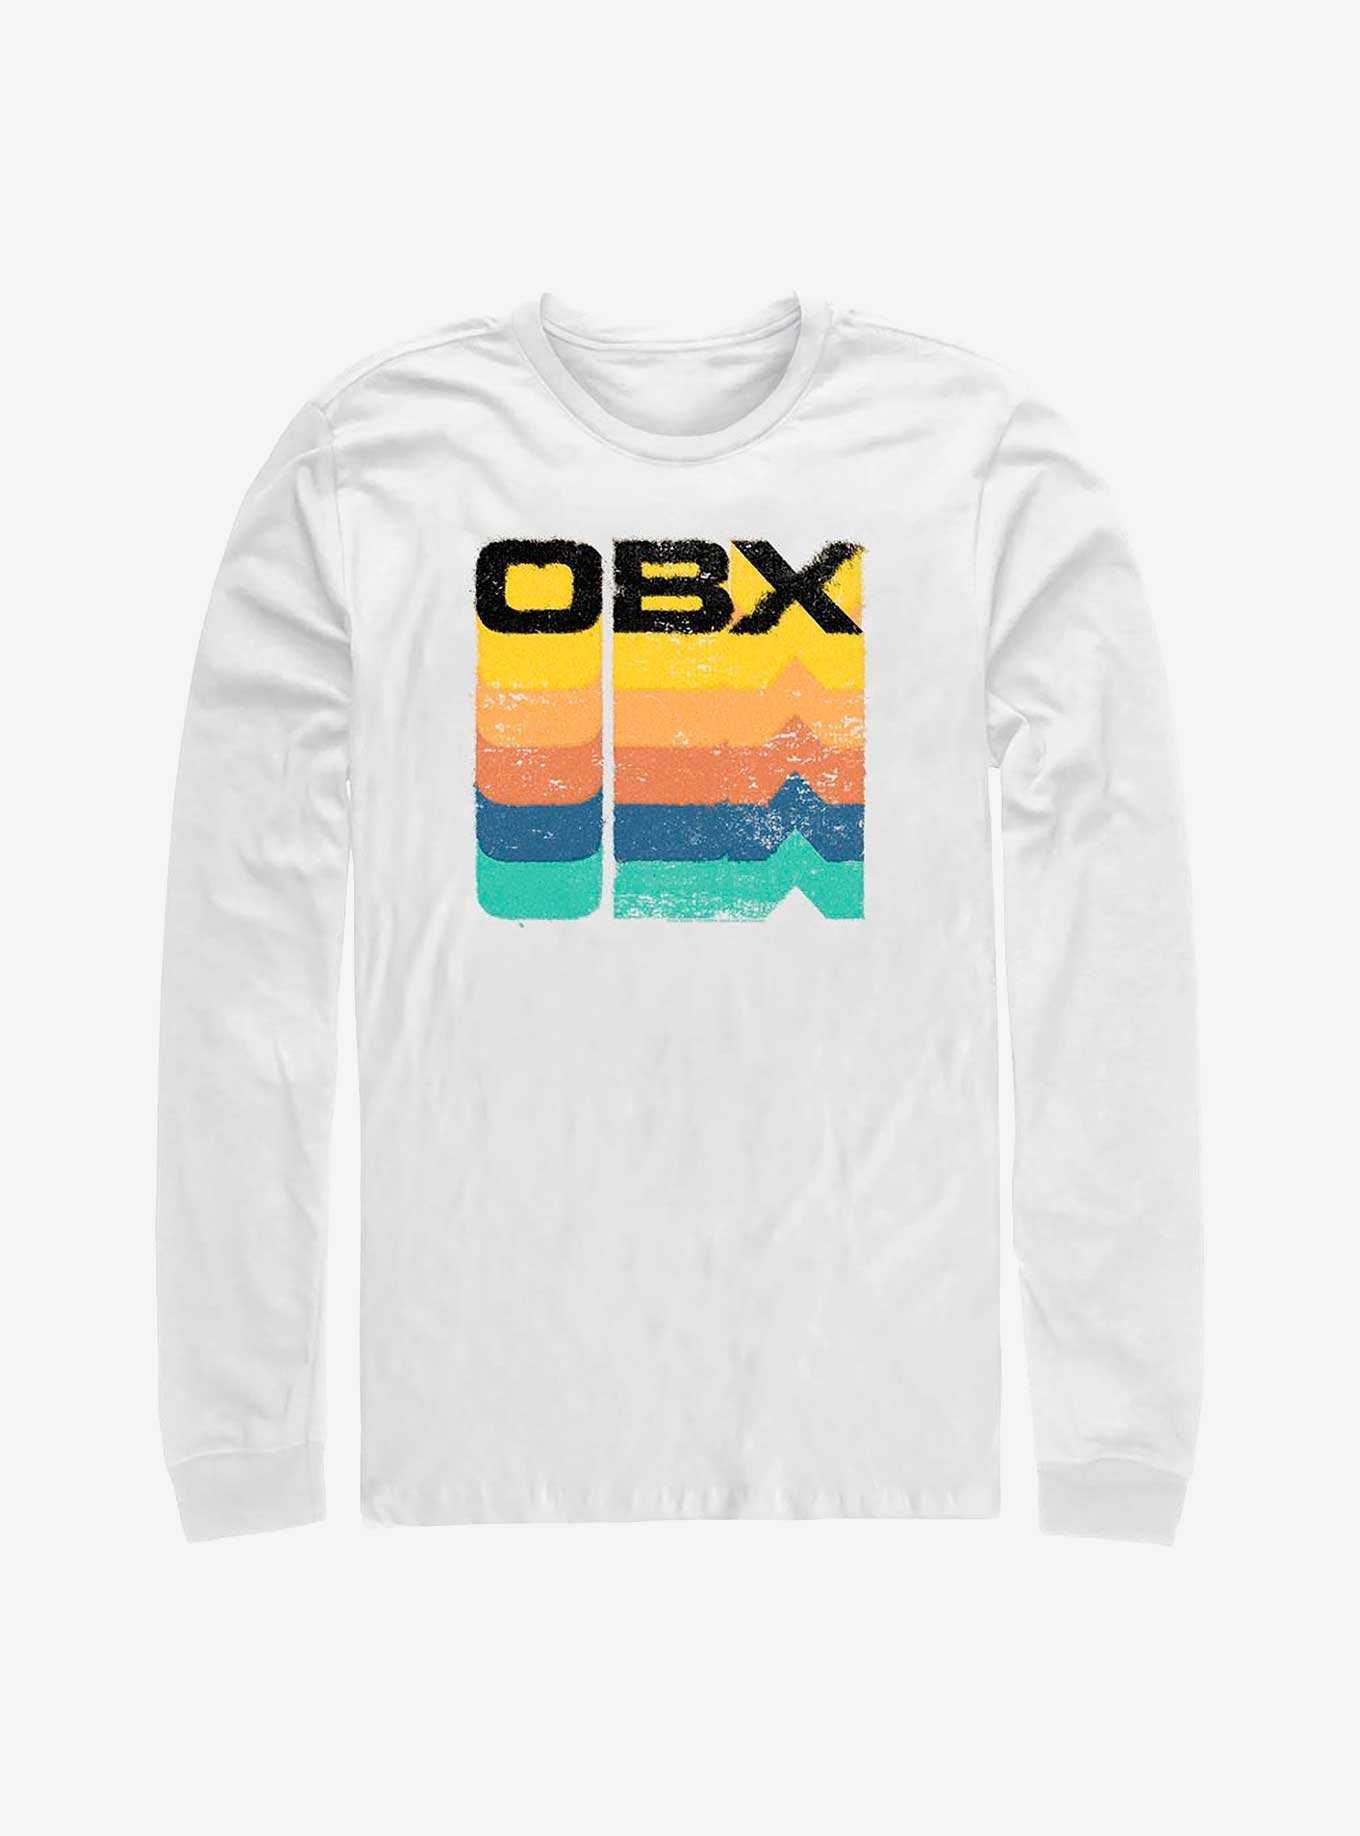 Outer Banks OBX Rainbow Stack Long-Sleeve T-Shirt, , hi-res